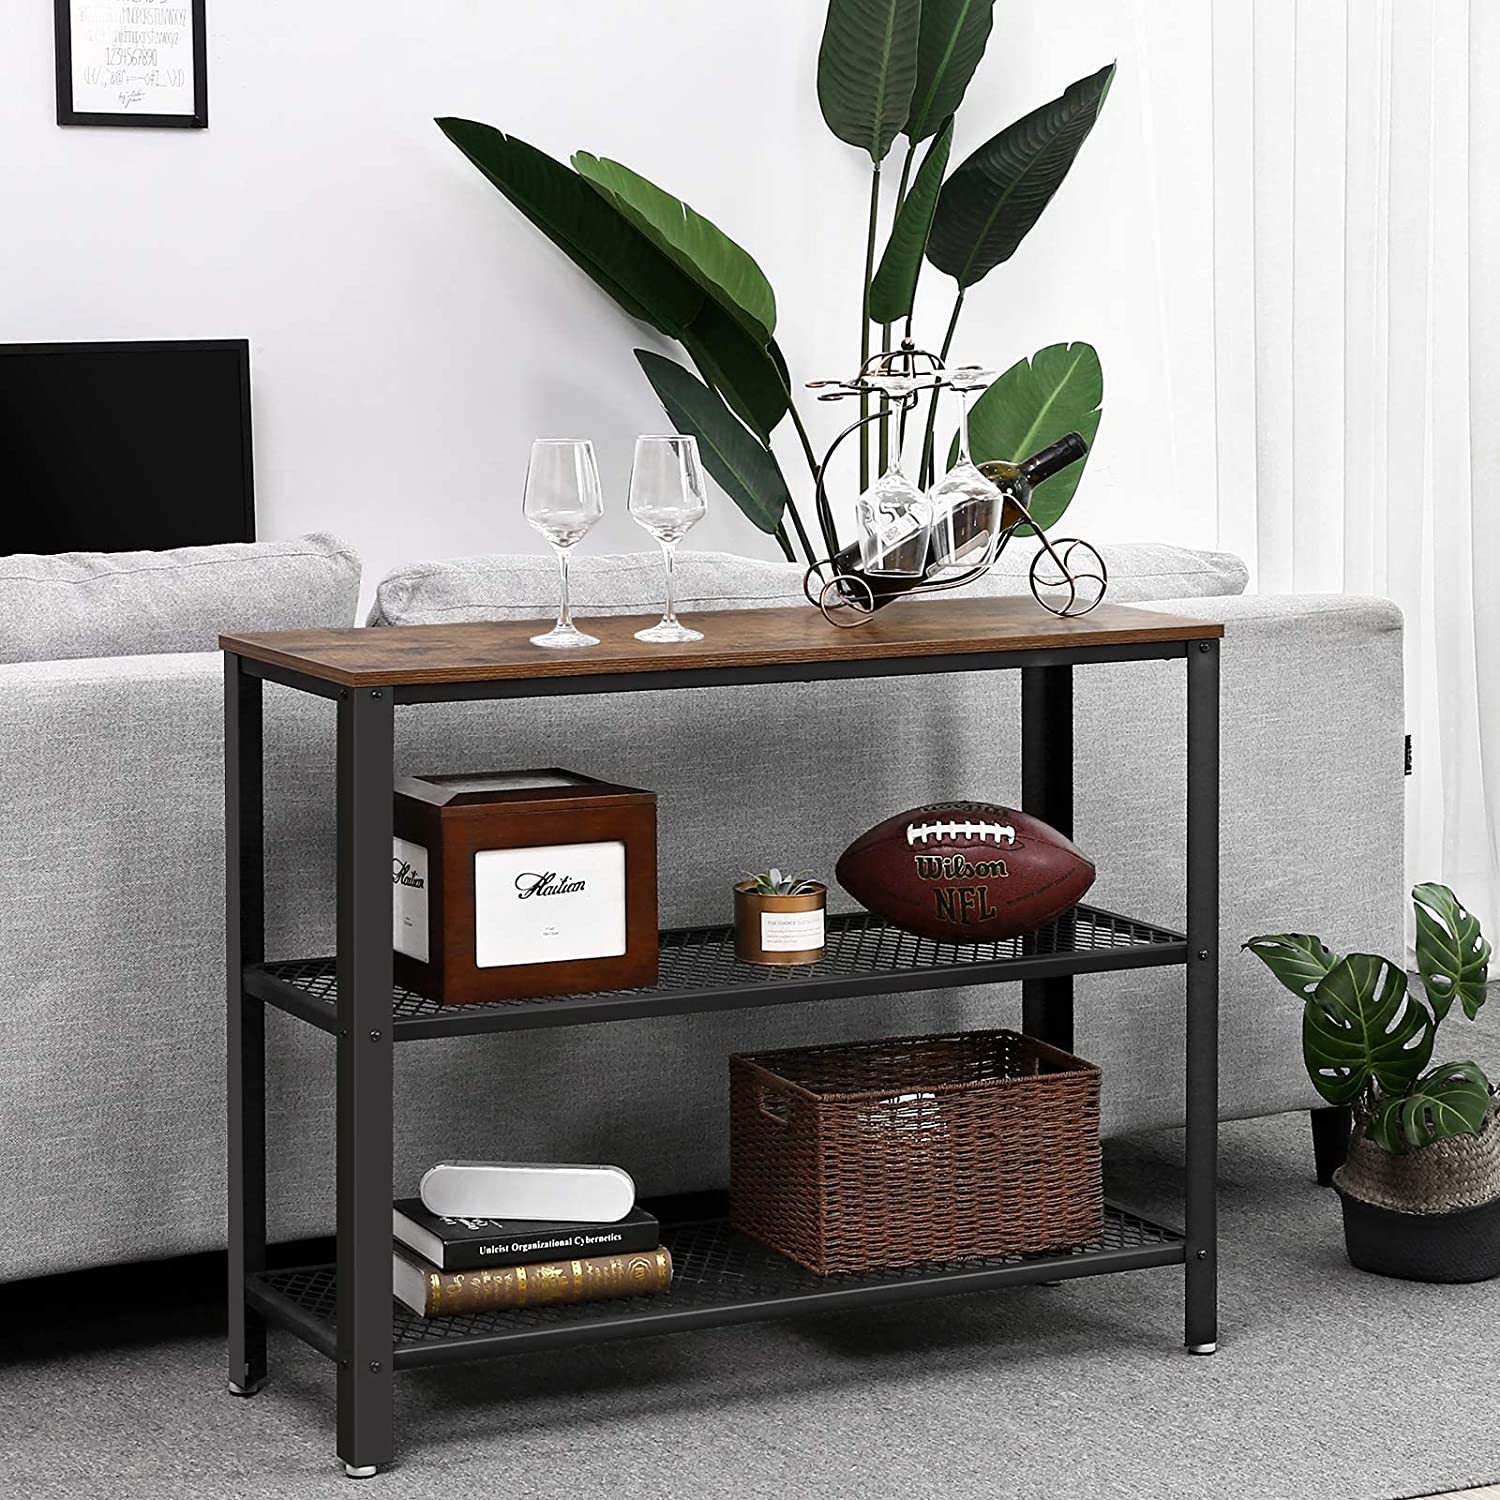 40" Console Table, 3-Tier Entryway Table with Storage Shelf, Narrow Sofa Table for Living Room